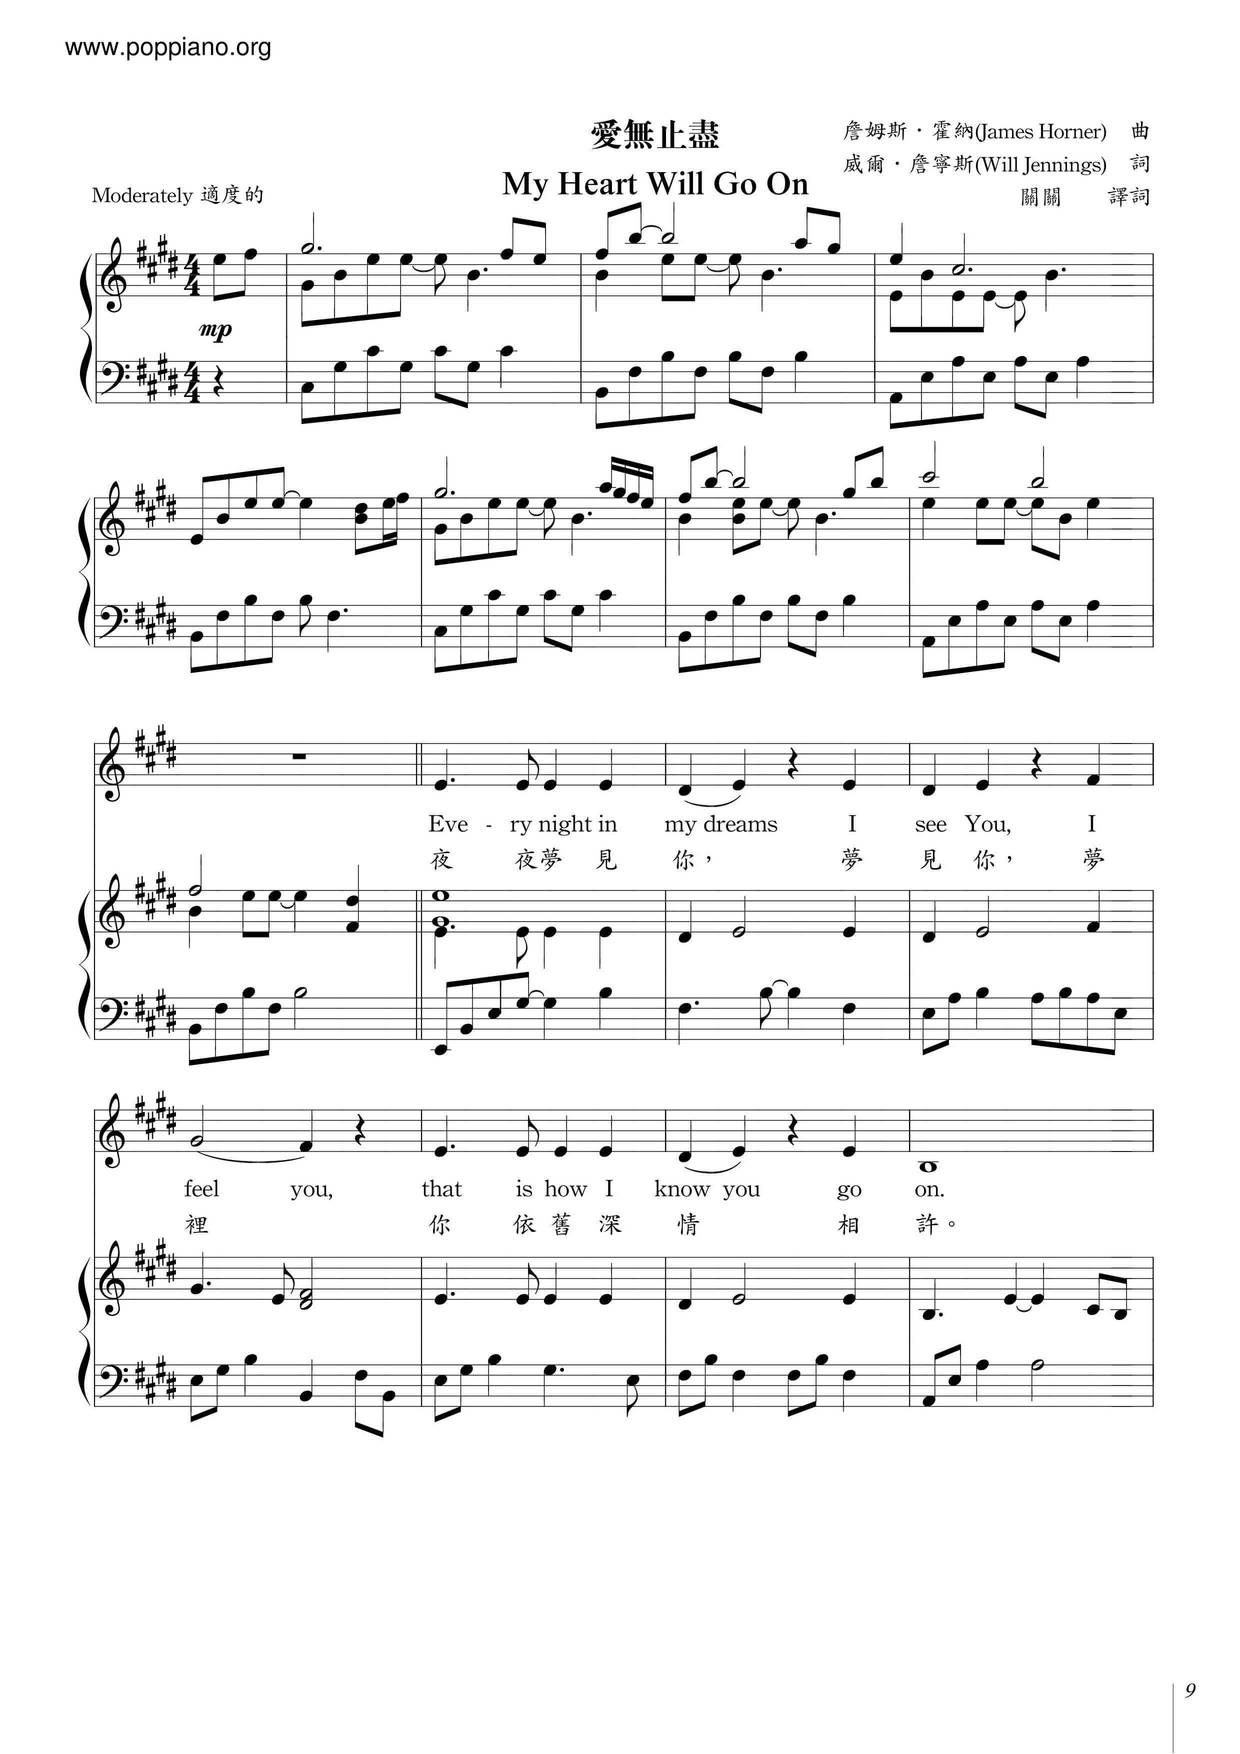 Celine Dion My Heart Will Go On Sheet Music Pdf マイハート ウィル ゴー オン 楽譜 Free Score Download